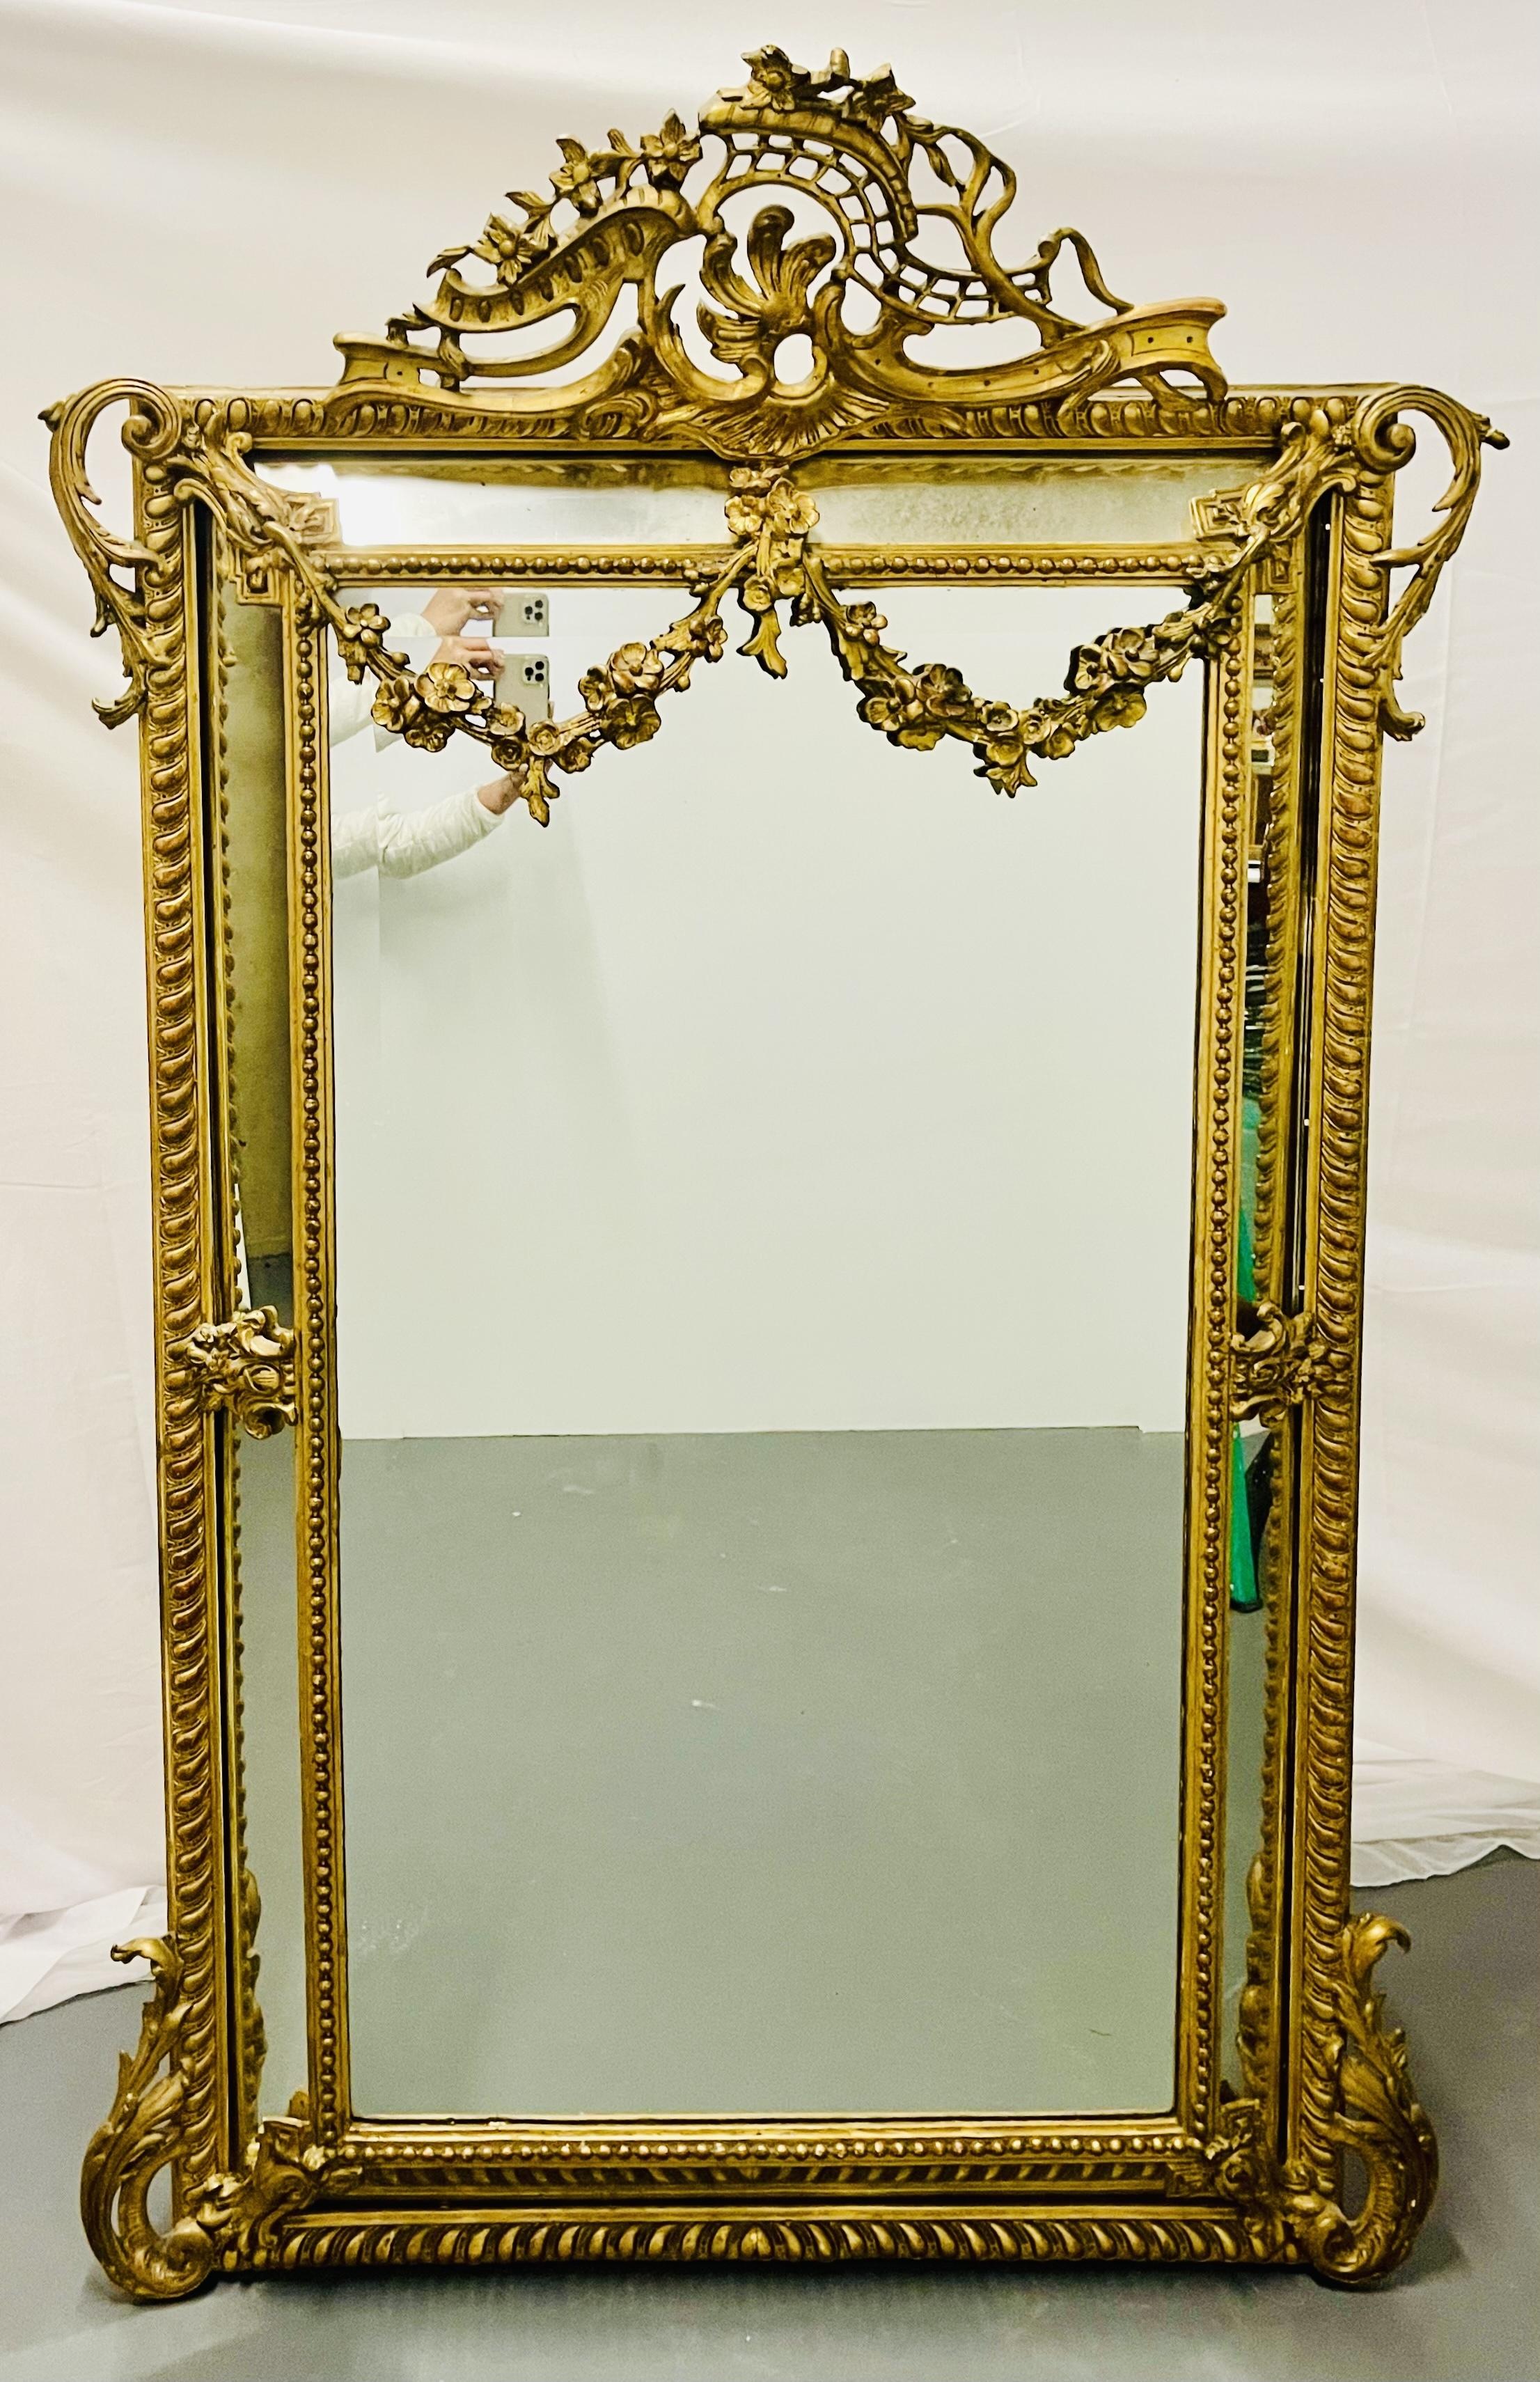 Louis XVI style, 19th century pier, console or wall mirror. This reverse shadow box mirror is simply stunning having pierced carvings around a double gilt wood frame. The clean center mirror panel flanked by angled mirror panels on all sides encased